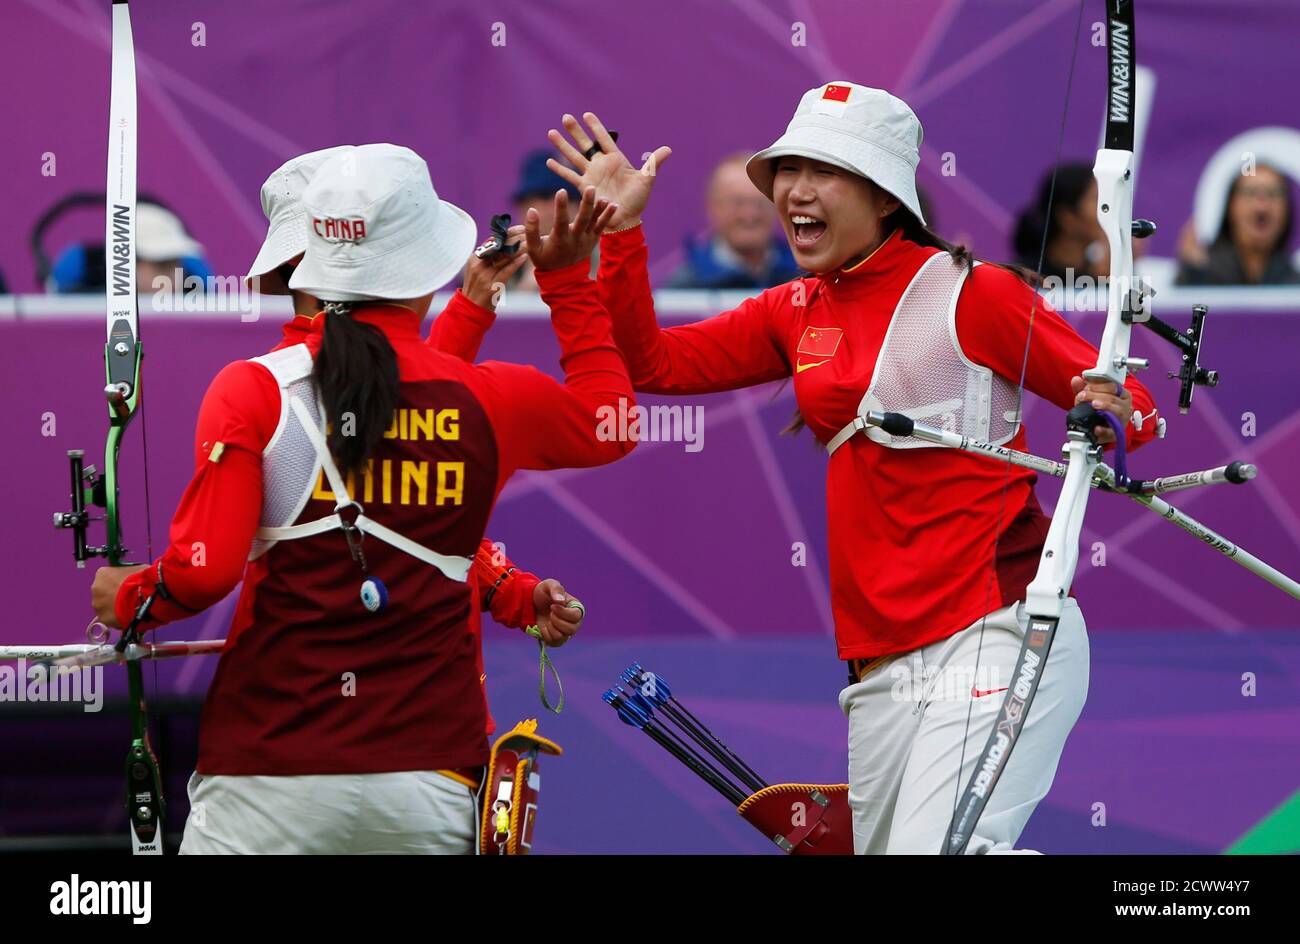 China's women archery team celebrates after defeating the U.S. in the women's archery team quarterfinals at the Lords Cricket Ground during the London 2012 Olympic Games July 29, 2012. From left,  Xu Jing, Cheng Ming (behind) and Fang Yuting. REUTERS/Suhaib Salem (BRITAIN  - Tags: SPORT OLYMPICS SPORT ARCHERY TPX IMAGES OF THE DAY) Stock Photo